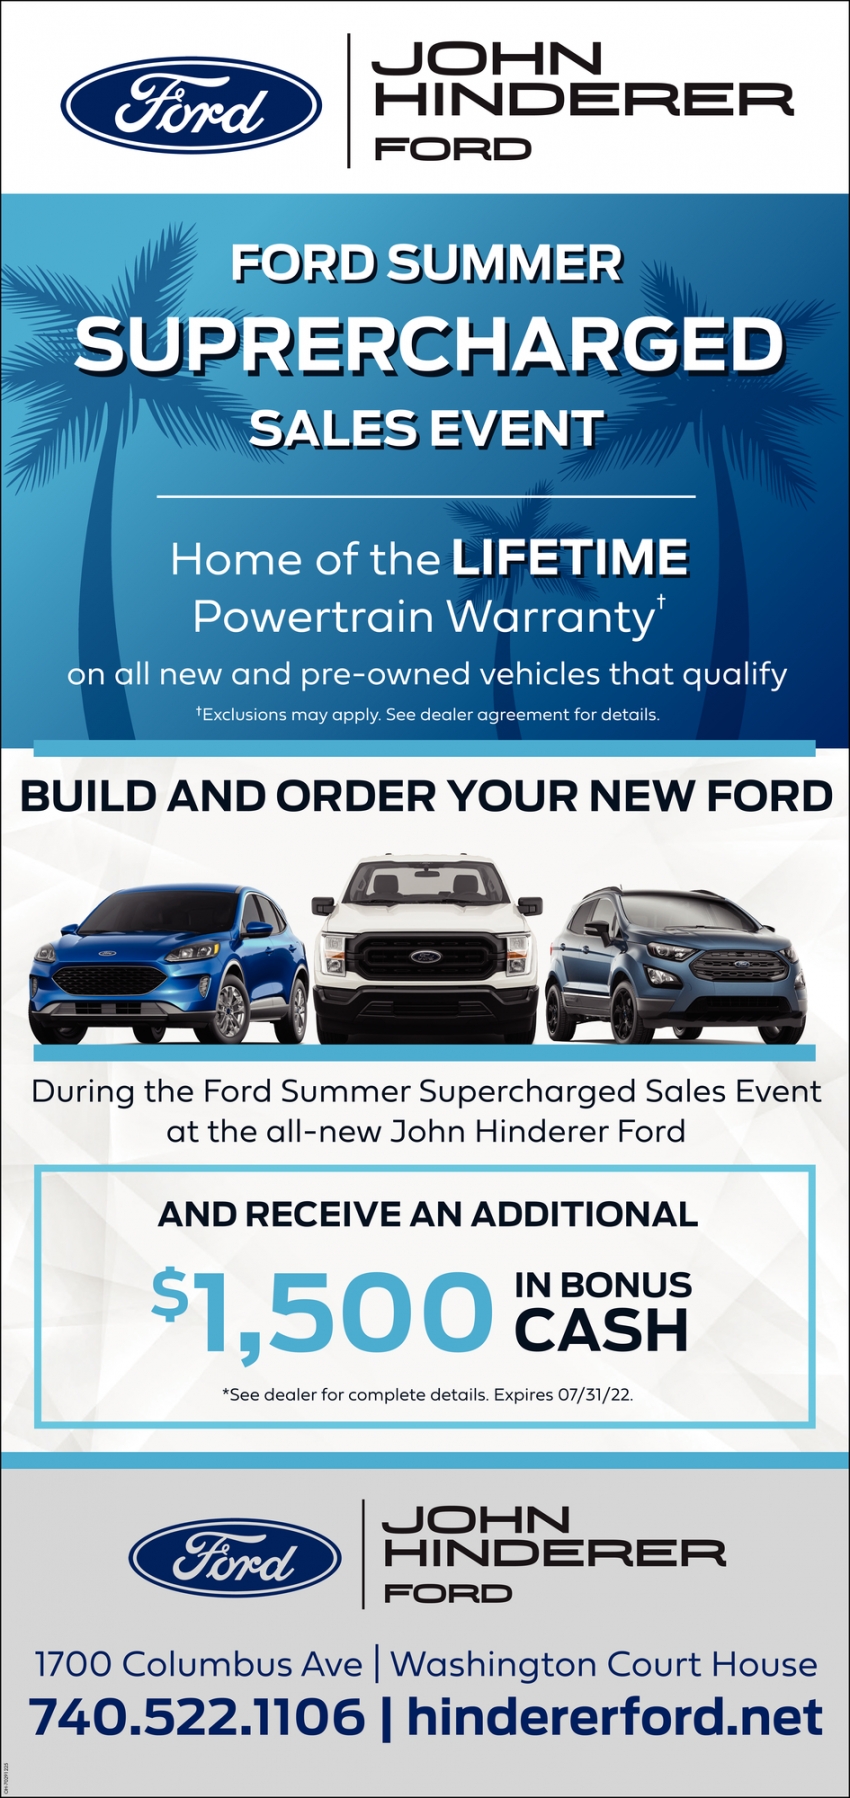 Supercharged Sales Event